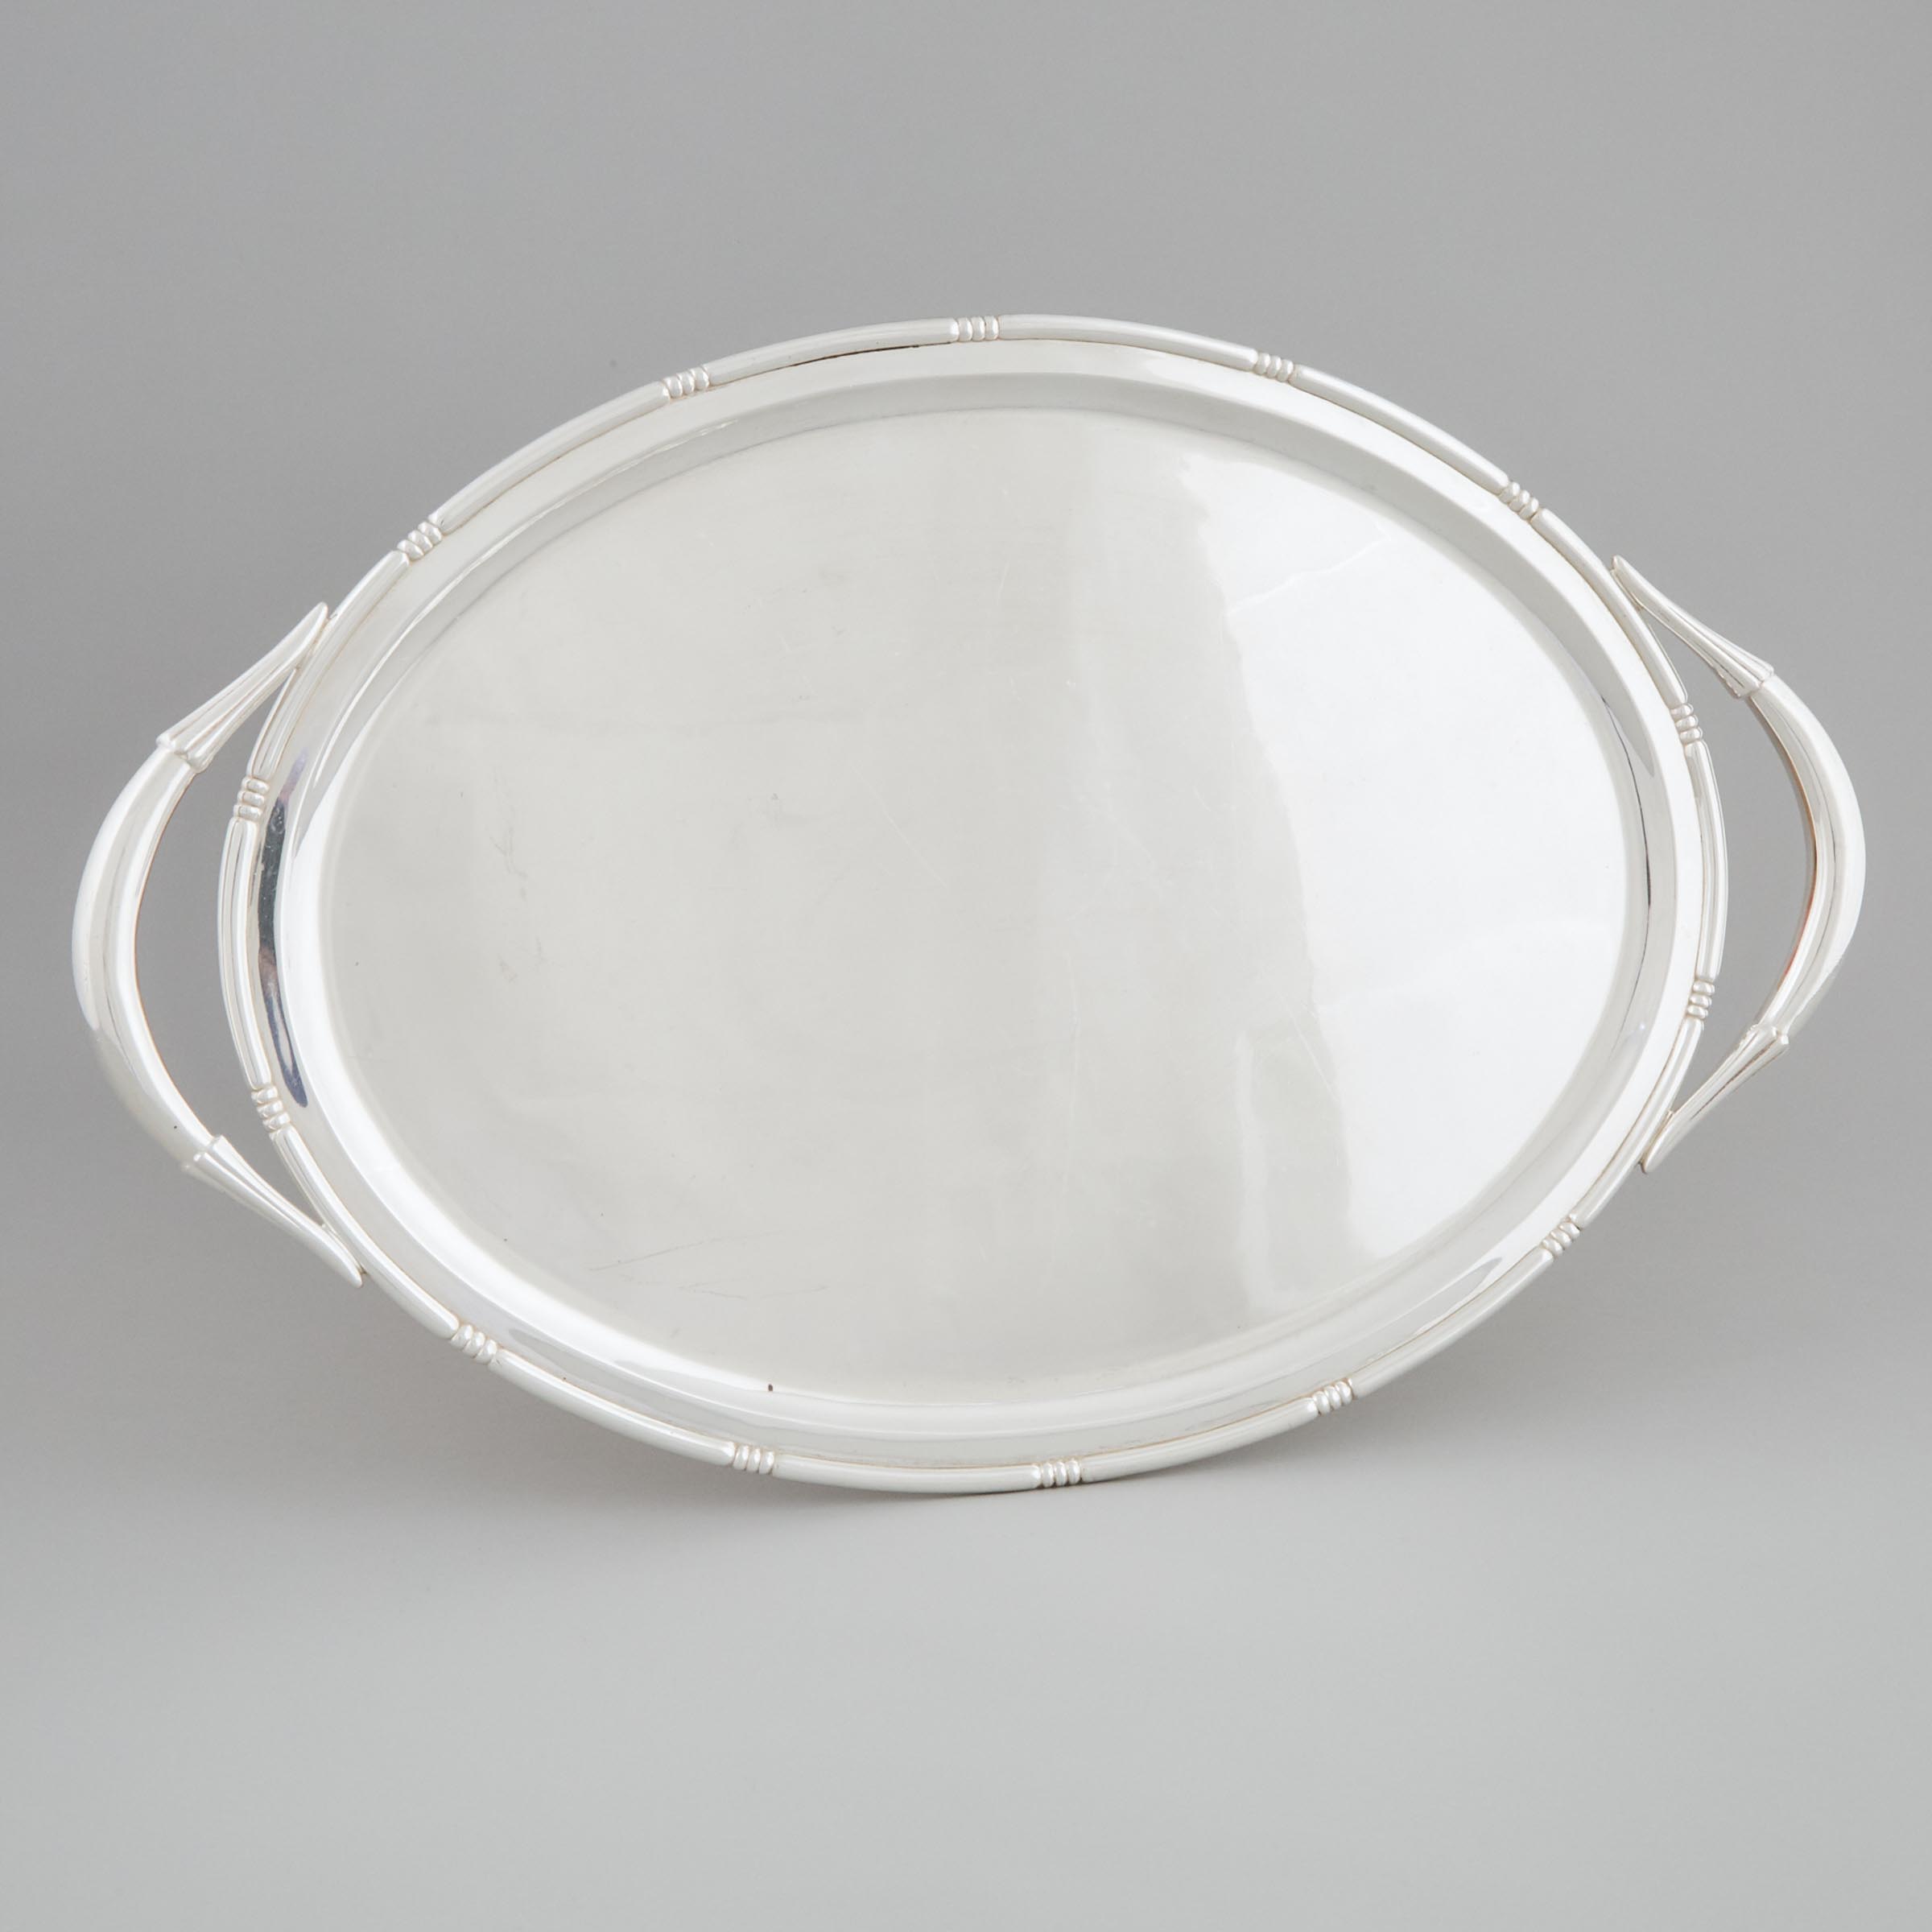 Mexican Silver Oval Two-Handled Serving Tray, probably Tango Aceves, Taxco, 20th century